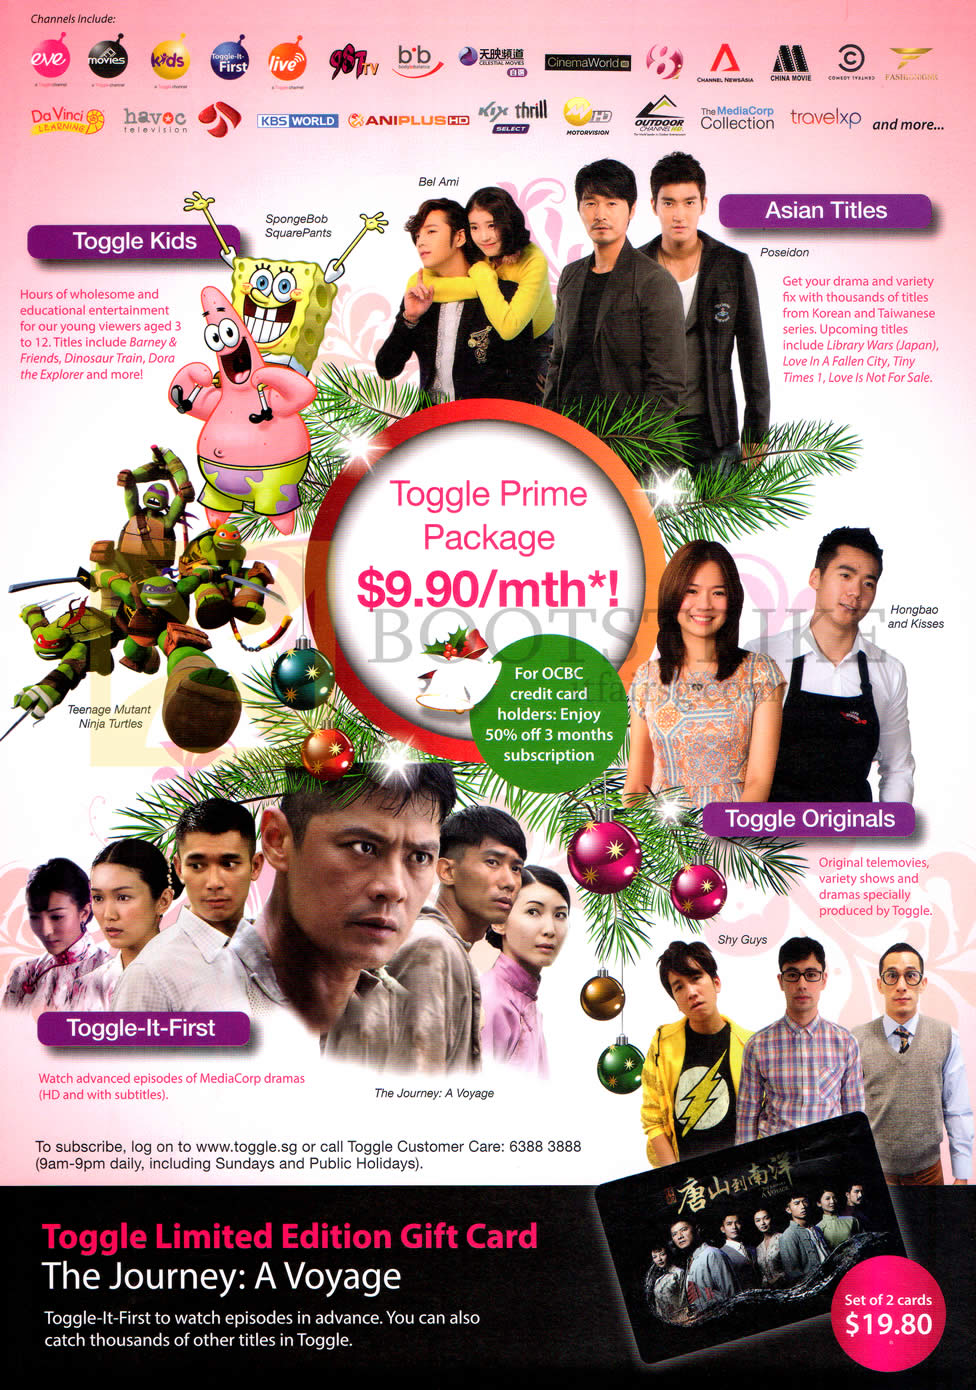 SITEX 2013 price list image brochure of Toggle Kids, Asian Titles, Originals, Prime Package